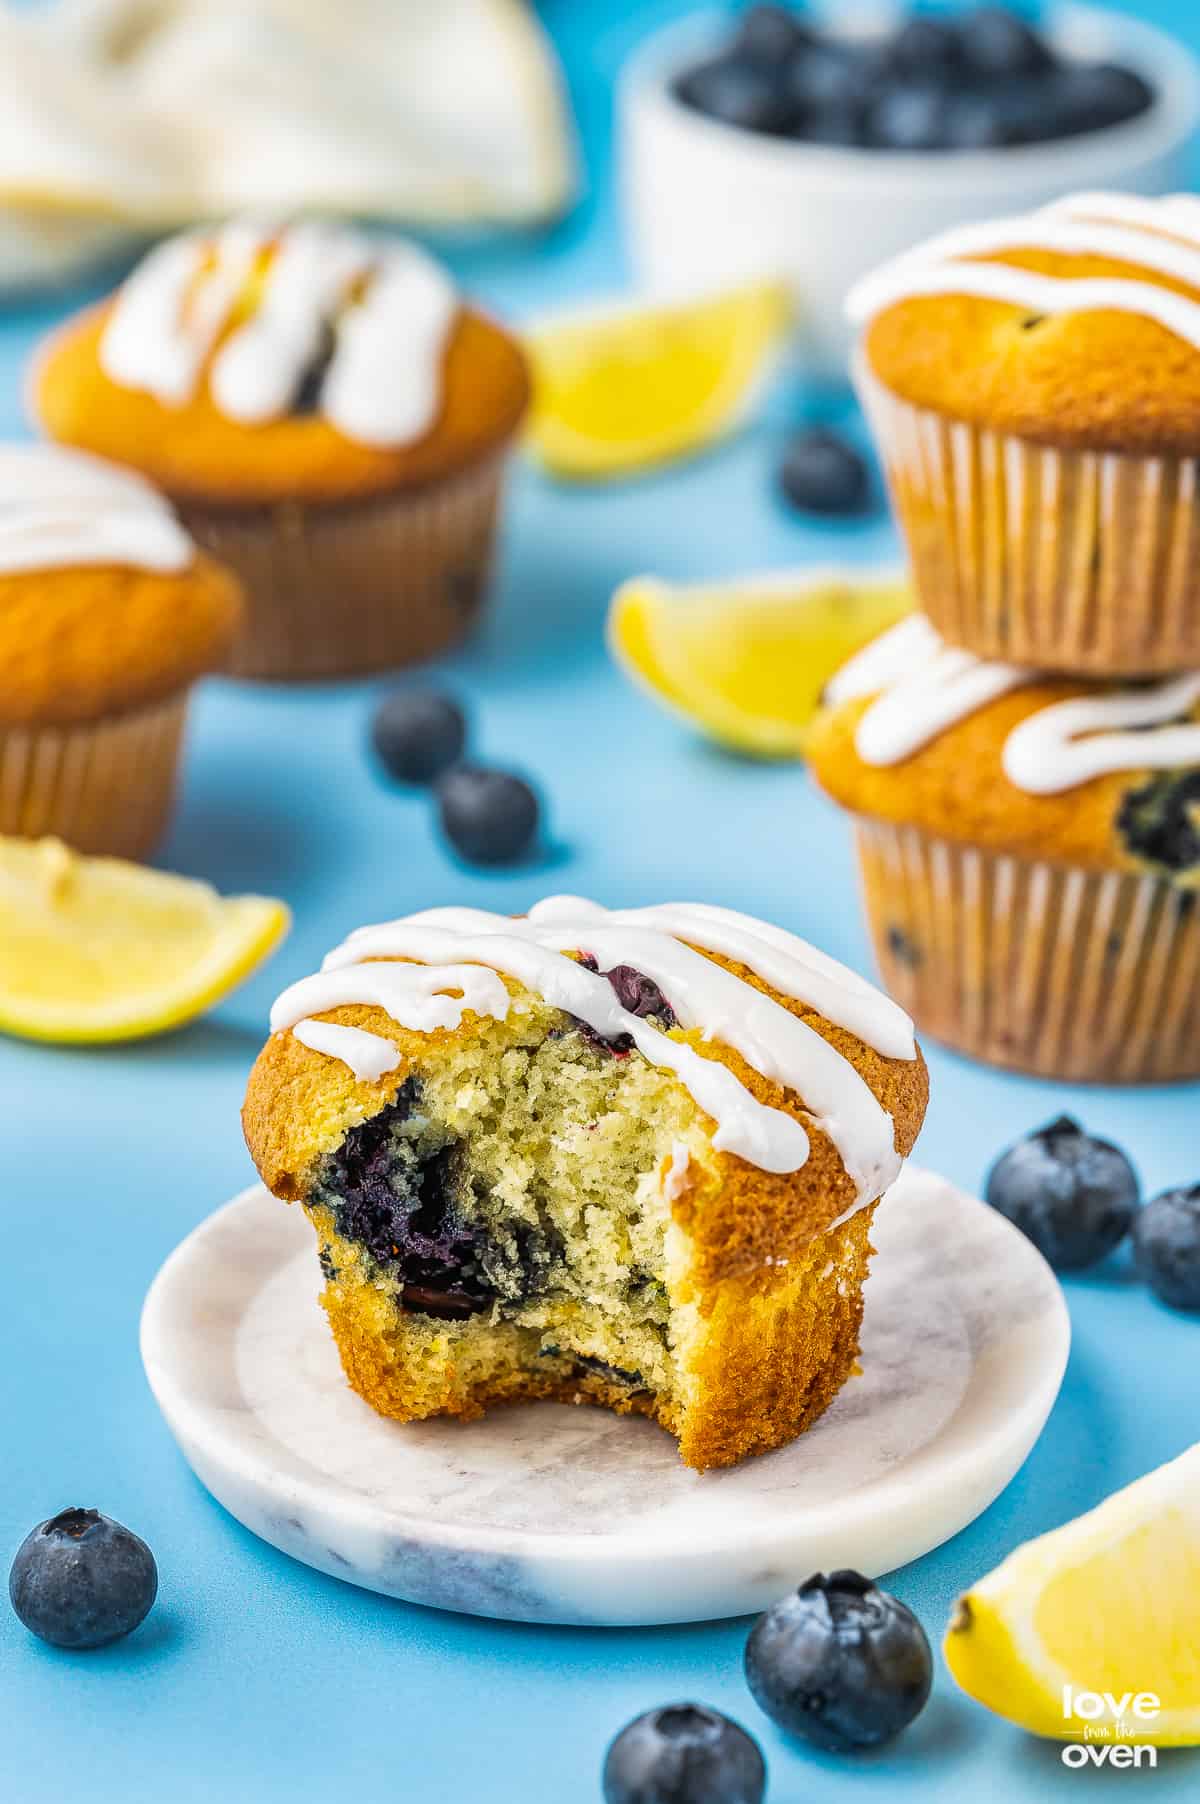 A lemon blueberry muffin on a blue background with a bite taken out of it